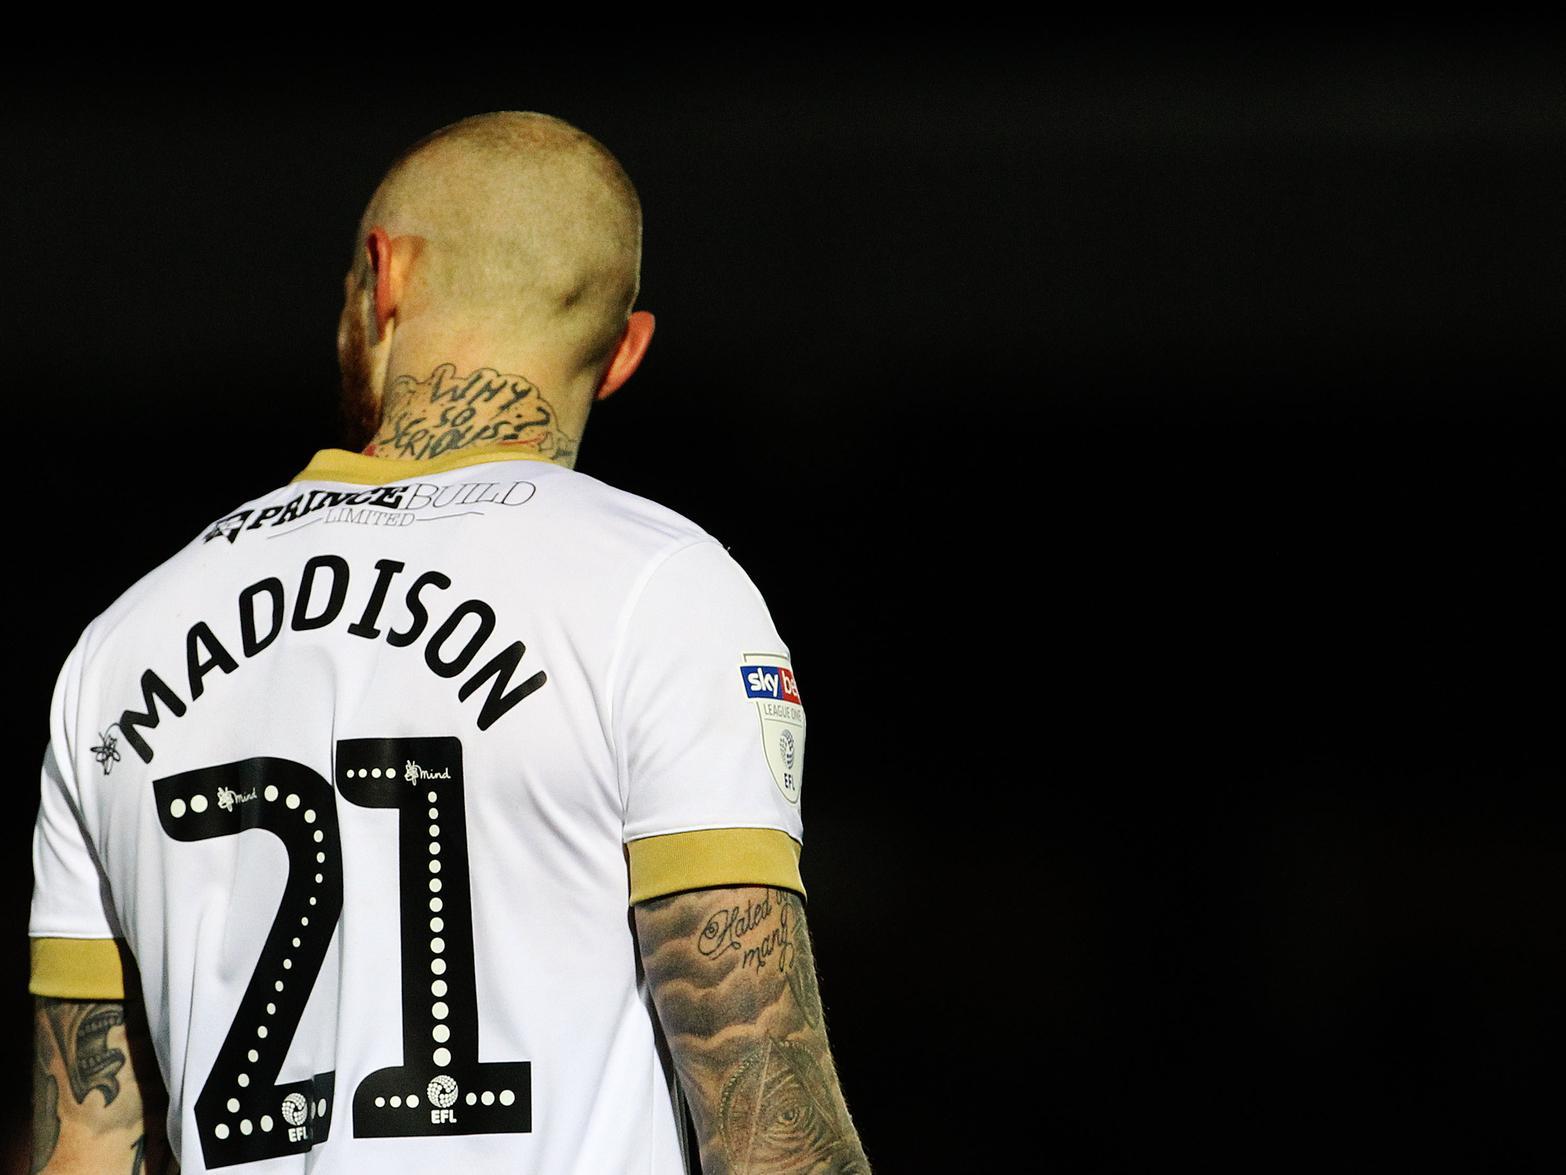 Peterborough United chairman Darragh MacAnthony has revealed on Twitter that the club have accepted to bids from Championship sides for Marcus Maddison, who is expected to leave the club imminently. (Sky Sports)